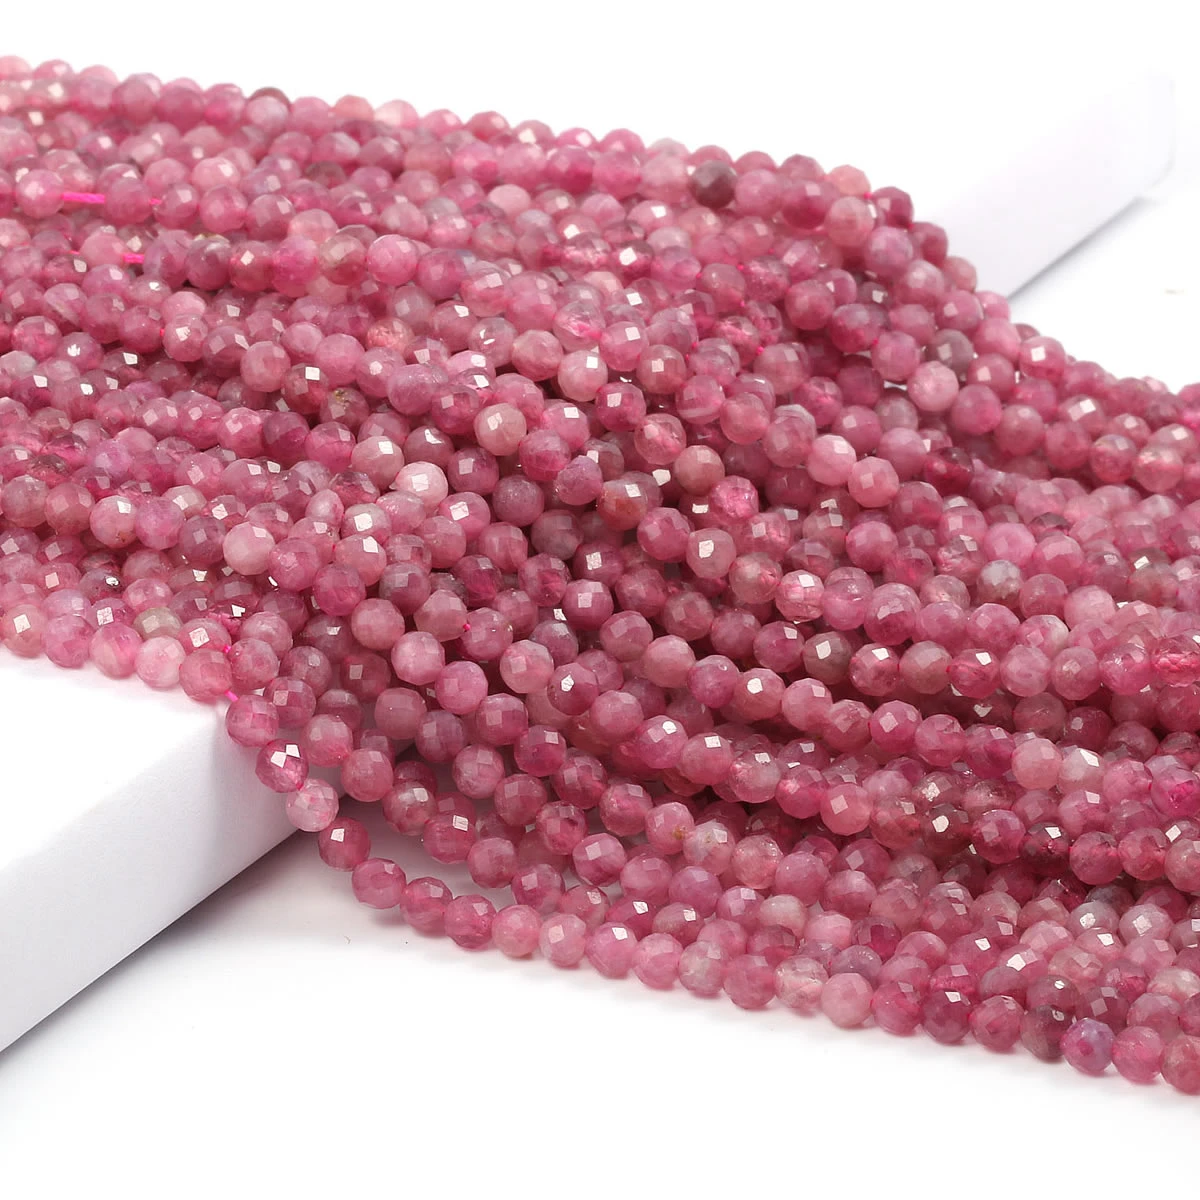 Natural Pink Tourmaline Beads Faceted Loose Round Beads for Jewelry Making Necklace DIY Bracelet Accessories 2 3 4mm